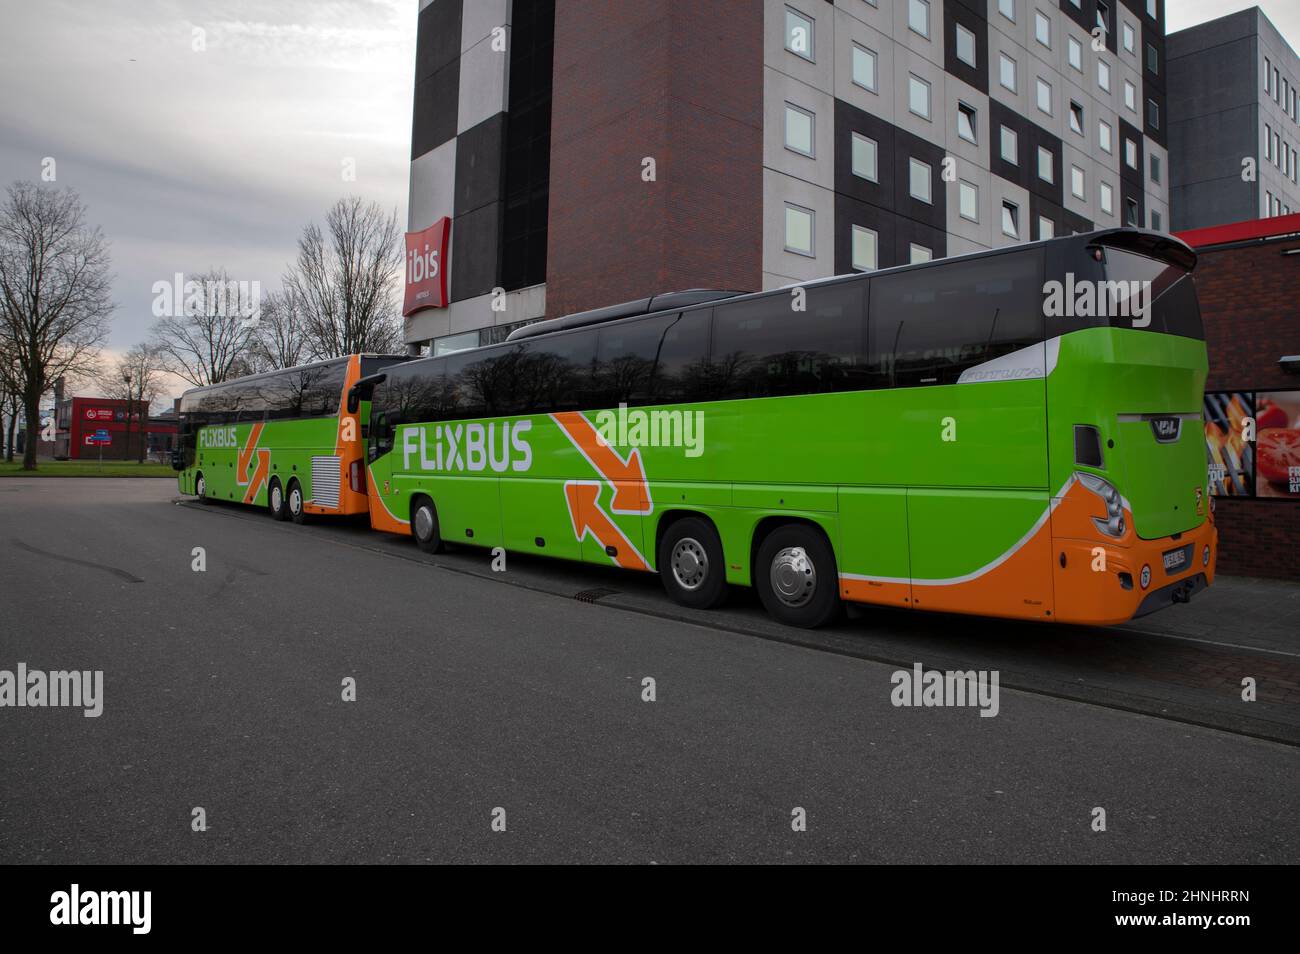 Page 2 - Flixbus High Resolution Stock Photography and Images - Alamy